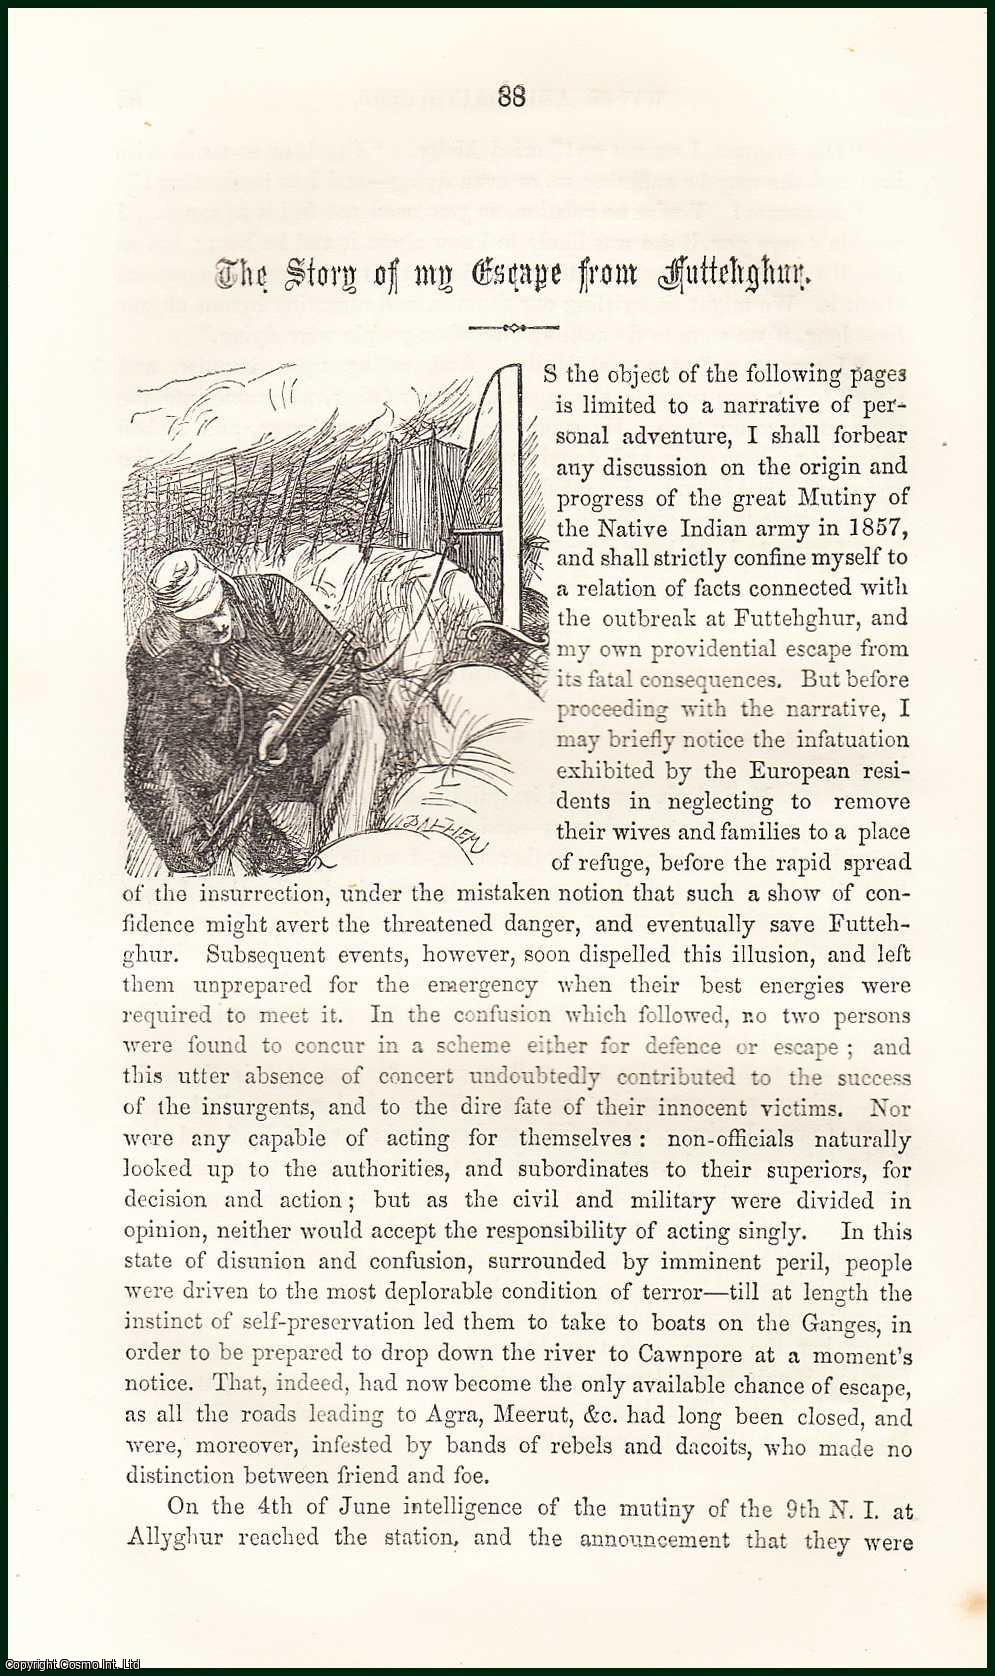 Gavin S. Jones - The Story of my Escape From Futtehghur. An uncommon original article from the Cornhill Magazine, 1865.